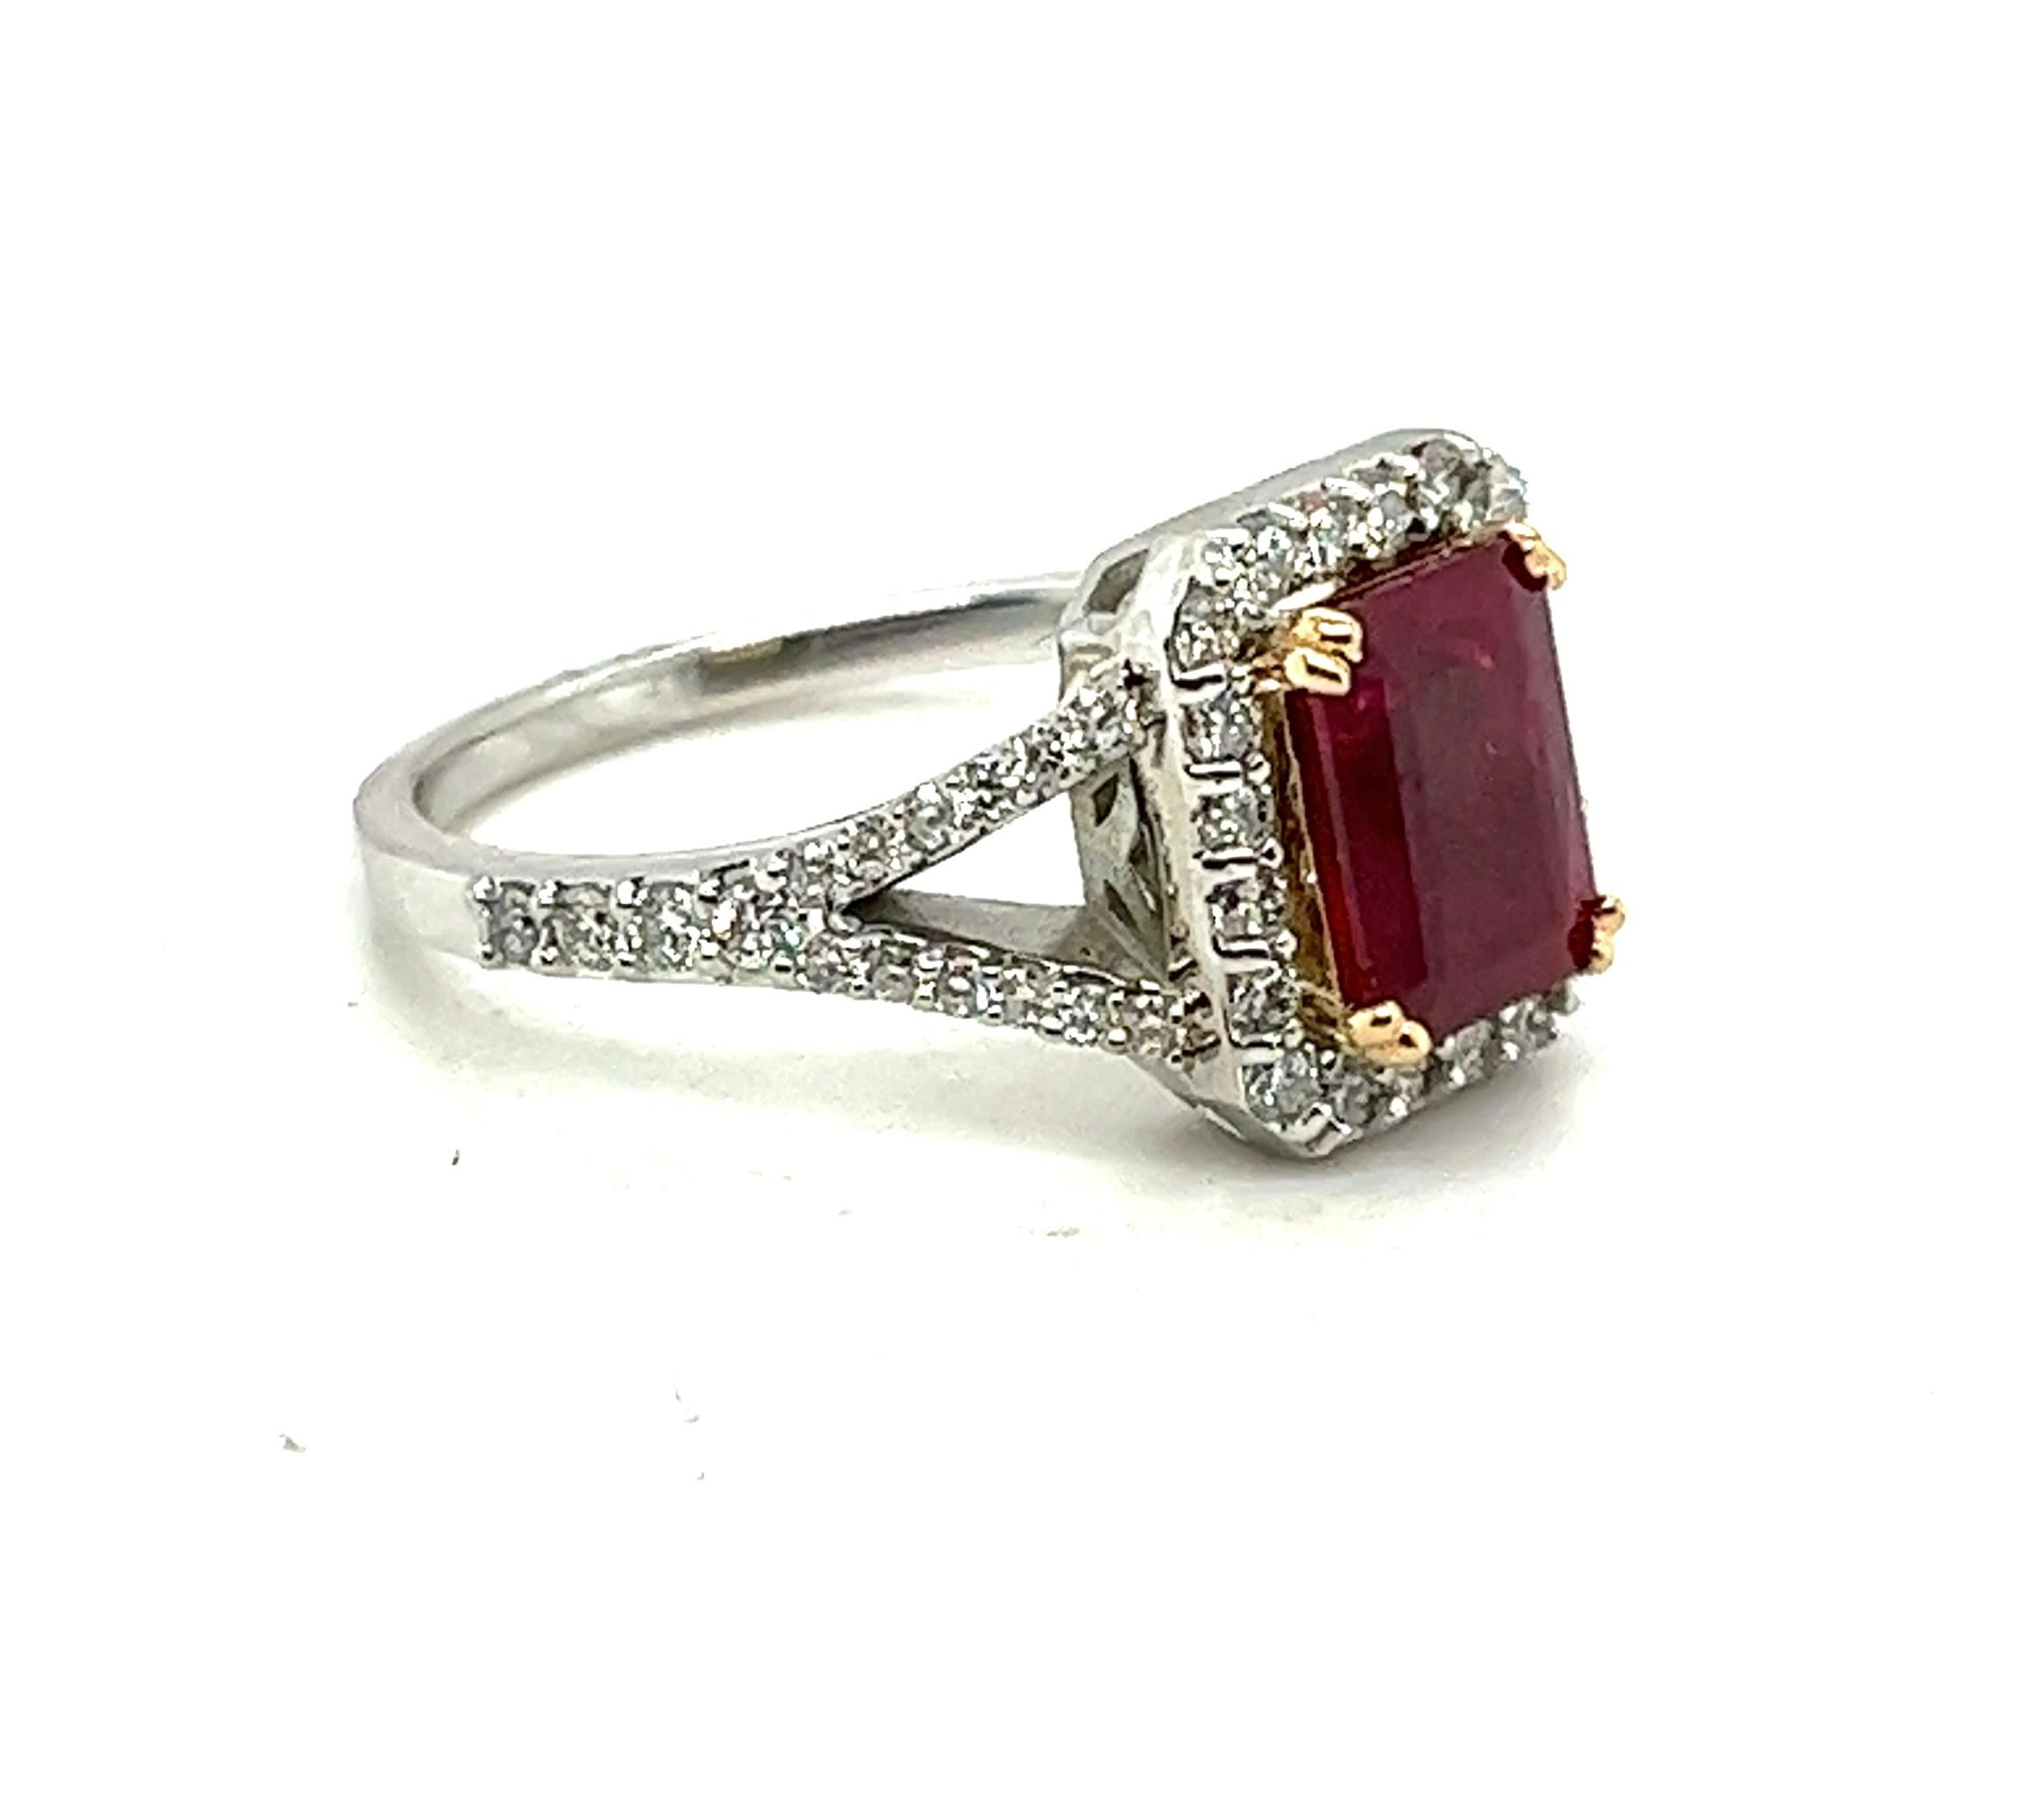  Enchanting 1.53 Carat Emerald Cut Red Ruby Engagement Ring

Capture the essence of love with this captivating engagement ring, featuring a mesmerizing 1.53 carat emerald cut red ruby as its centerpiece. Set within a stunning 18 karat yellow gold